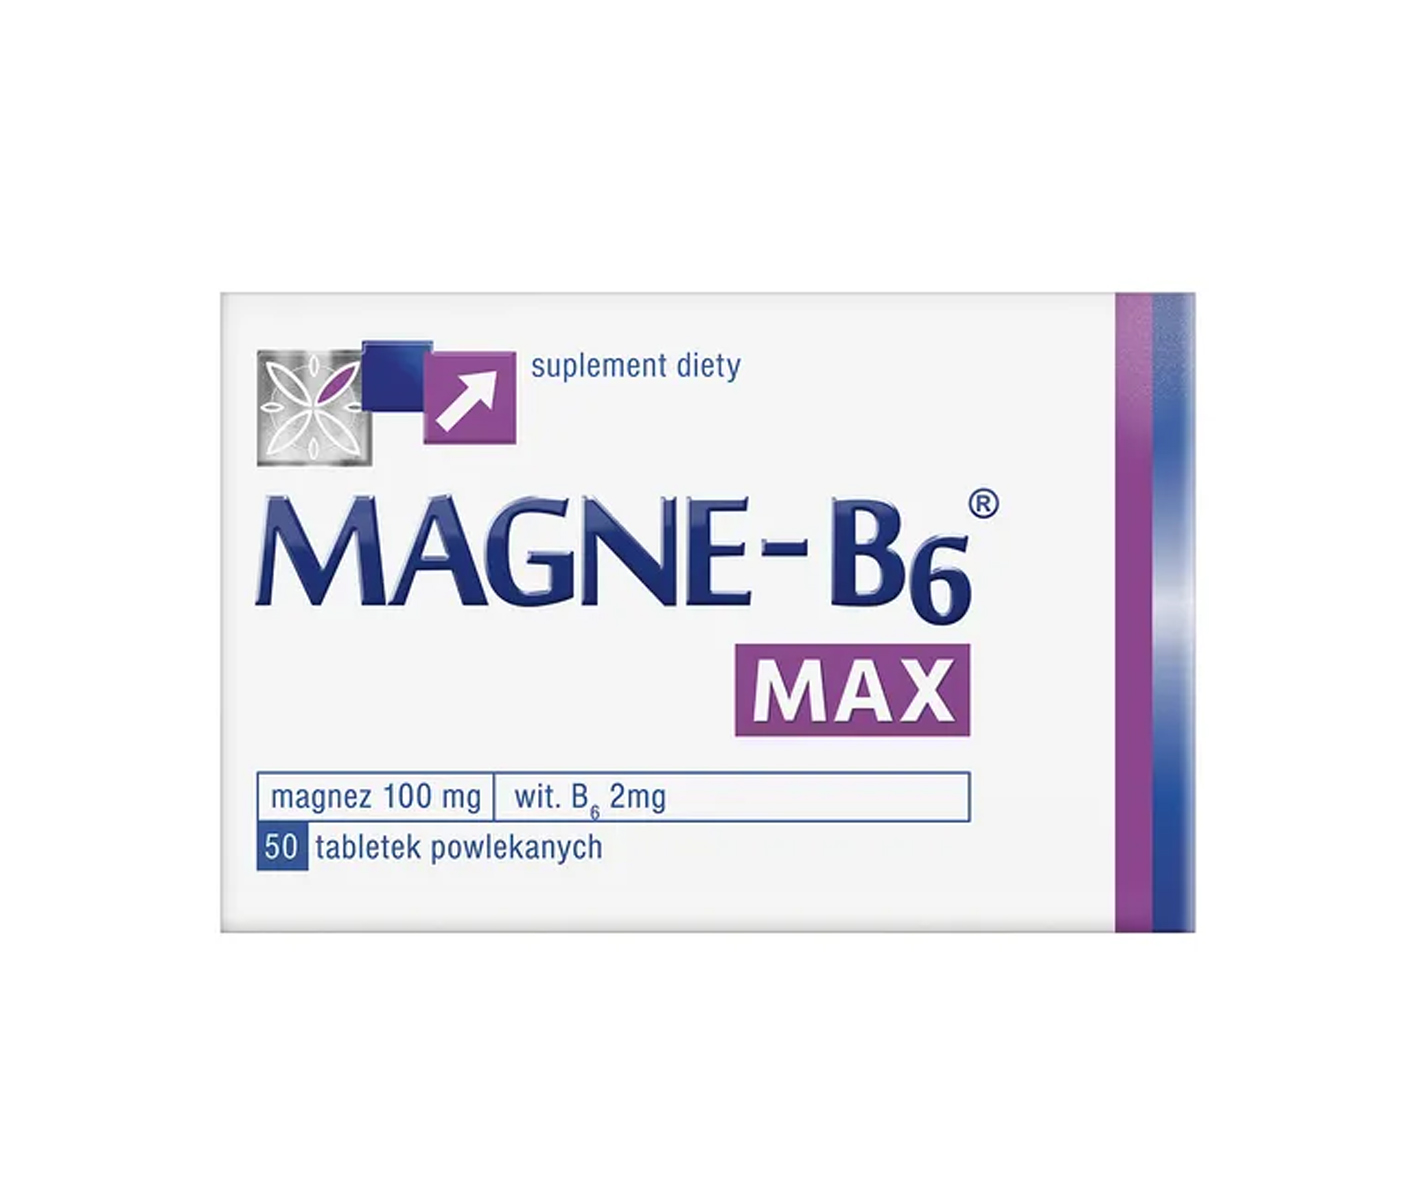 Opella Healthcare, Magne B6 Max, suplement diety z cytrynianem magnezu